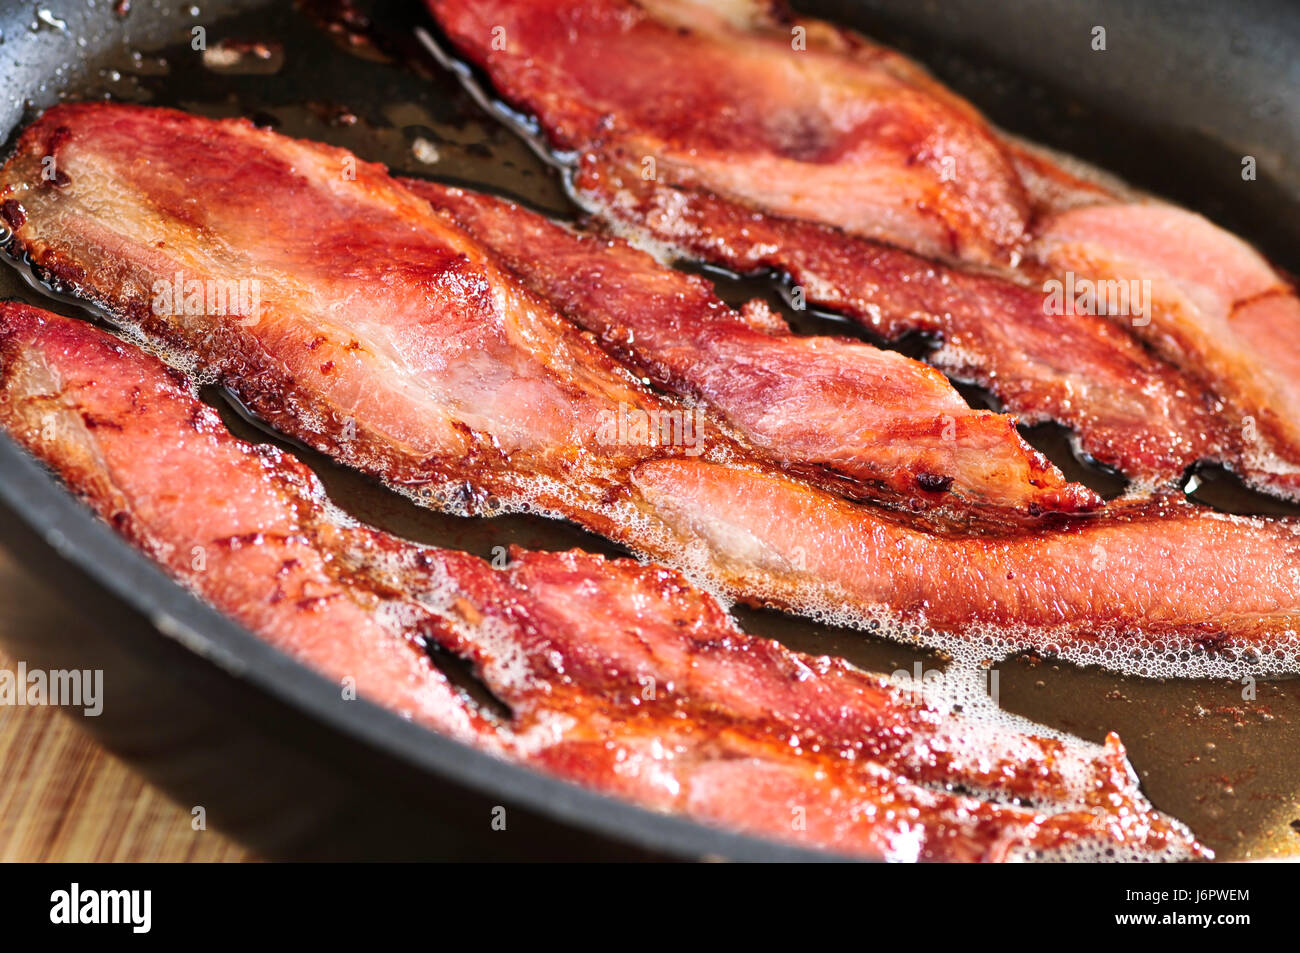 Frying pan with cooked bacon rashers on white background Stock Photo - Alamy